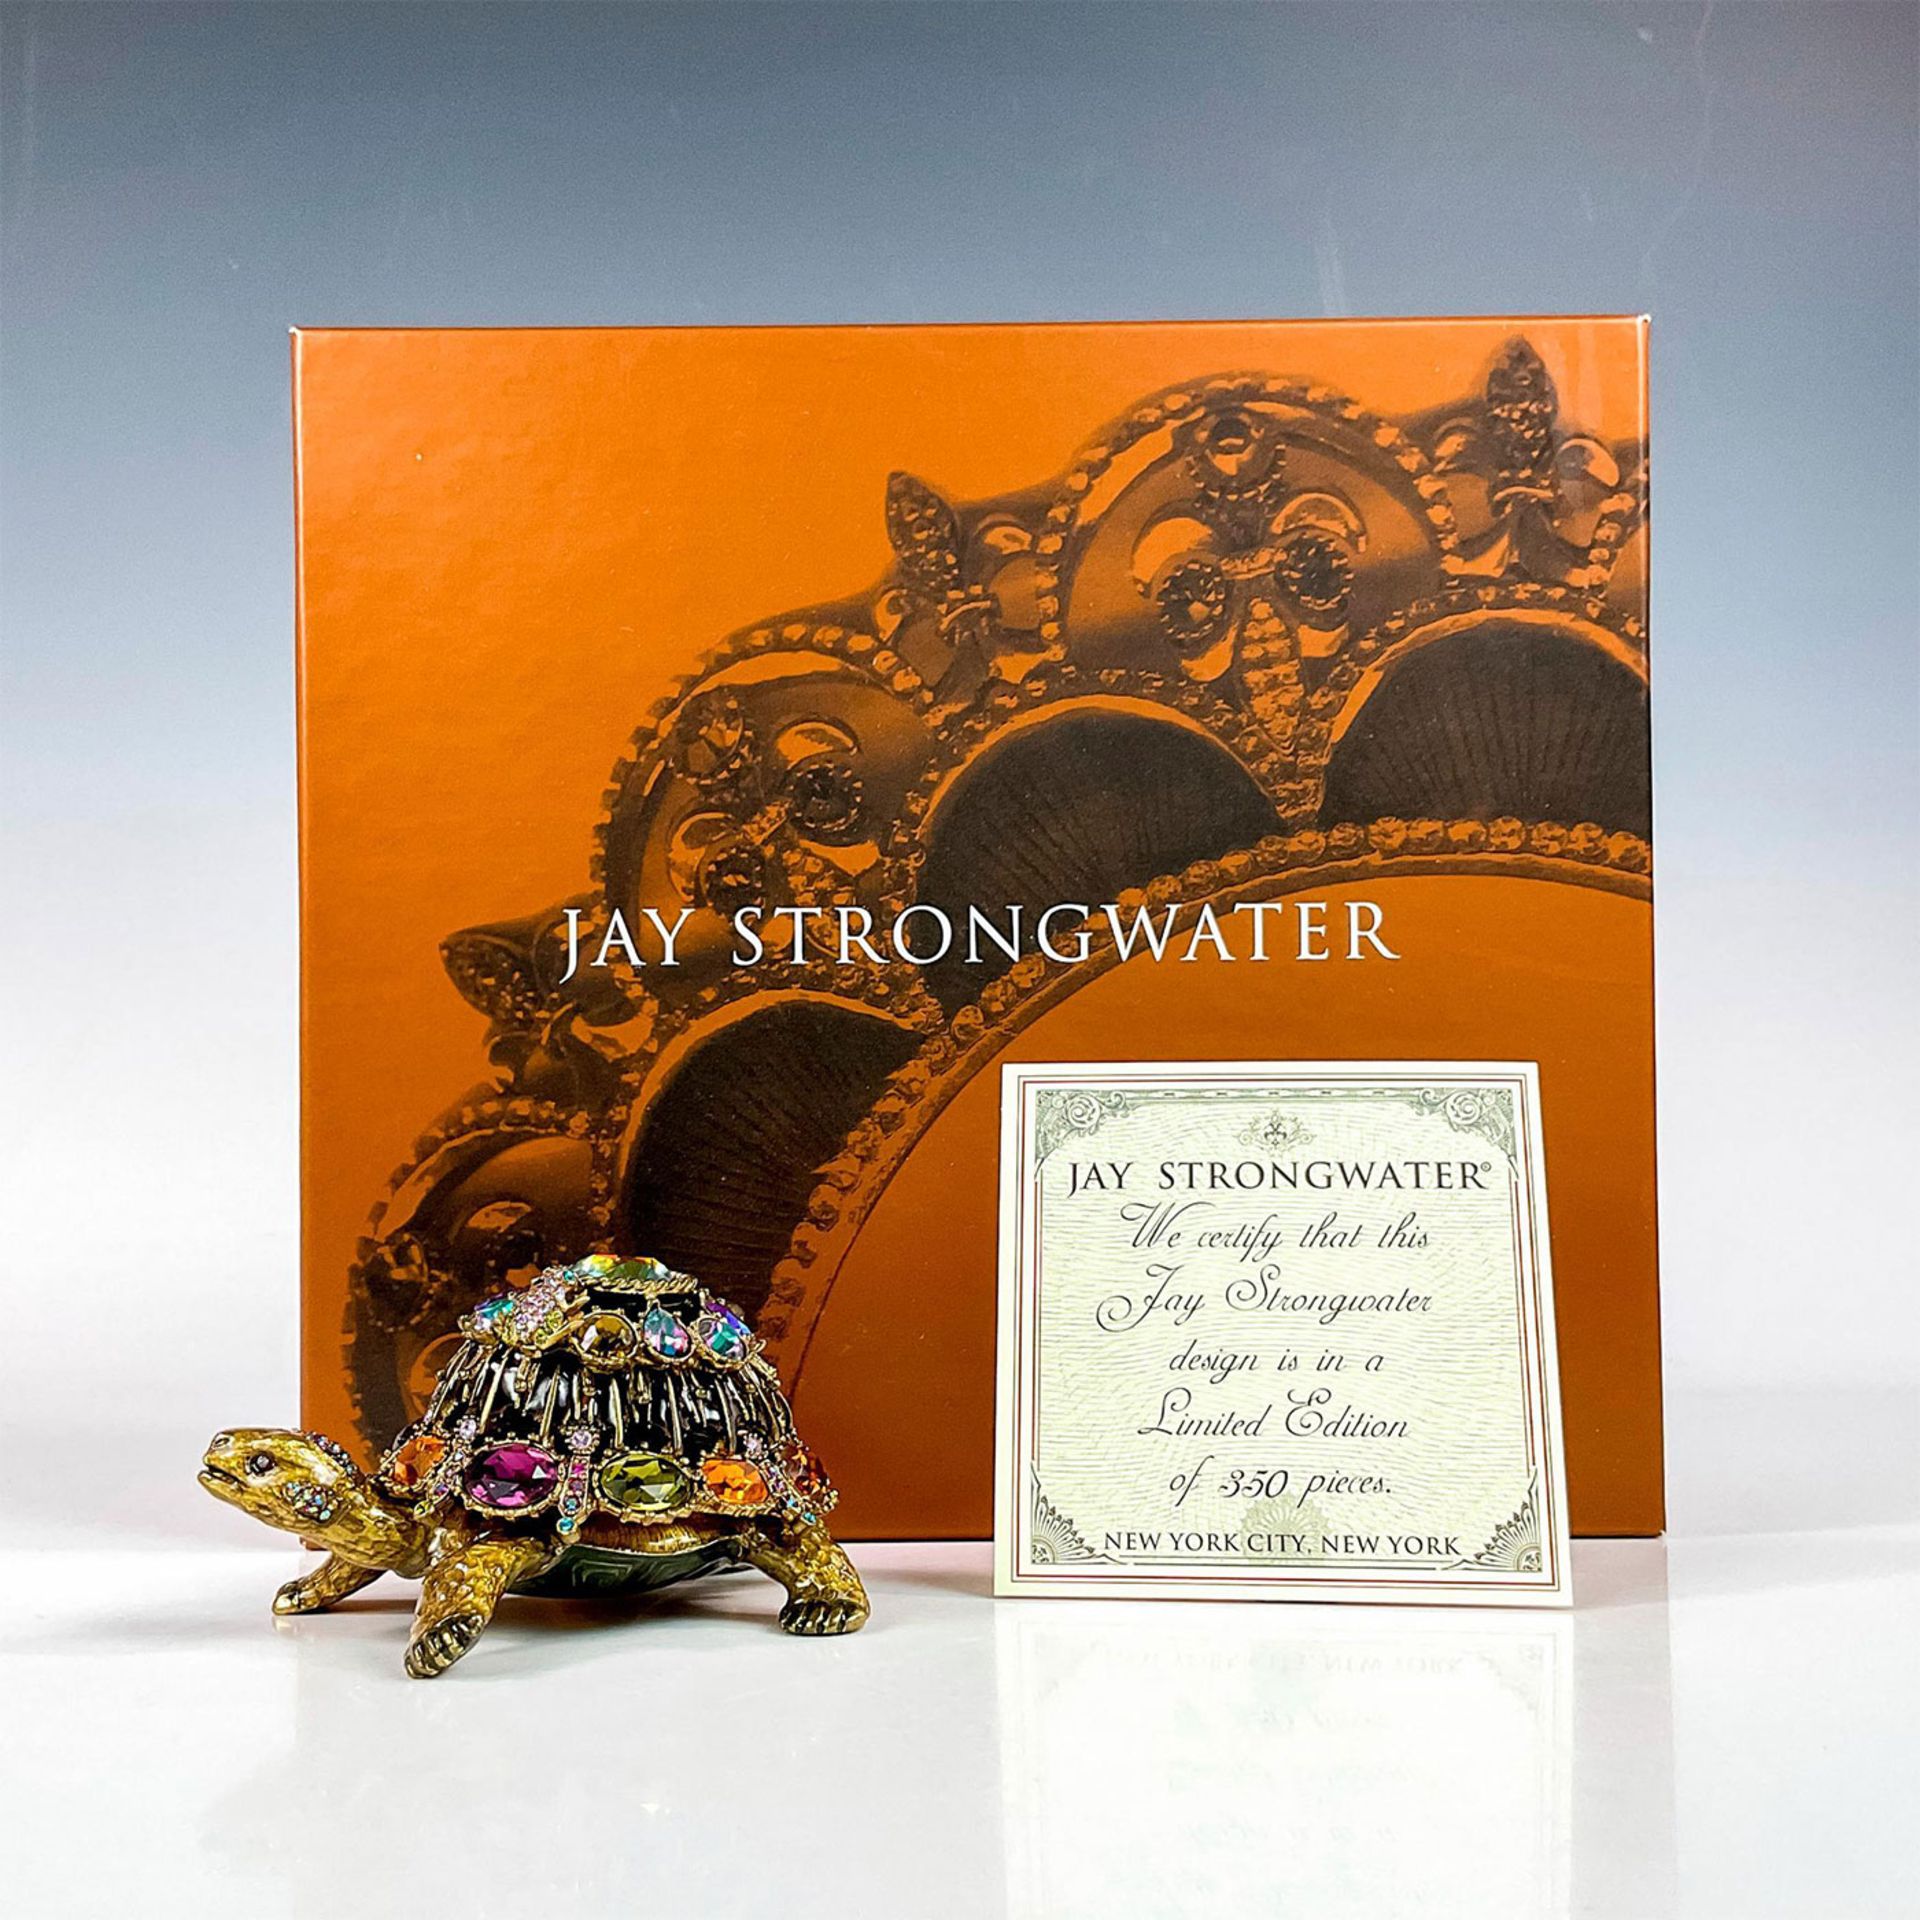 Jay Strongwater Limited Edition Bejeweled Tortoise Charm Box - Image 2 of 3